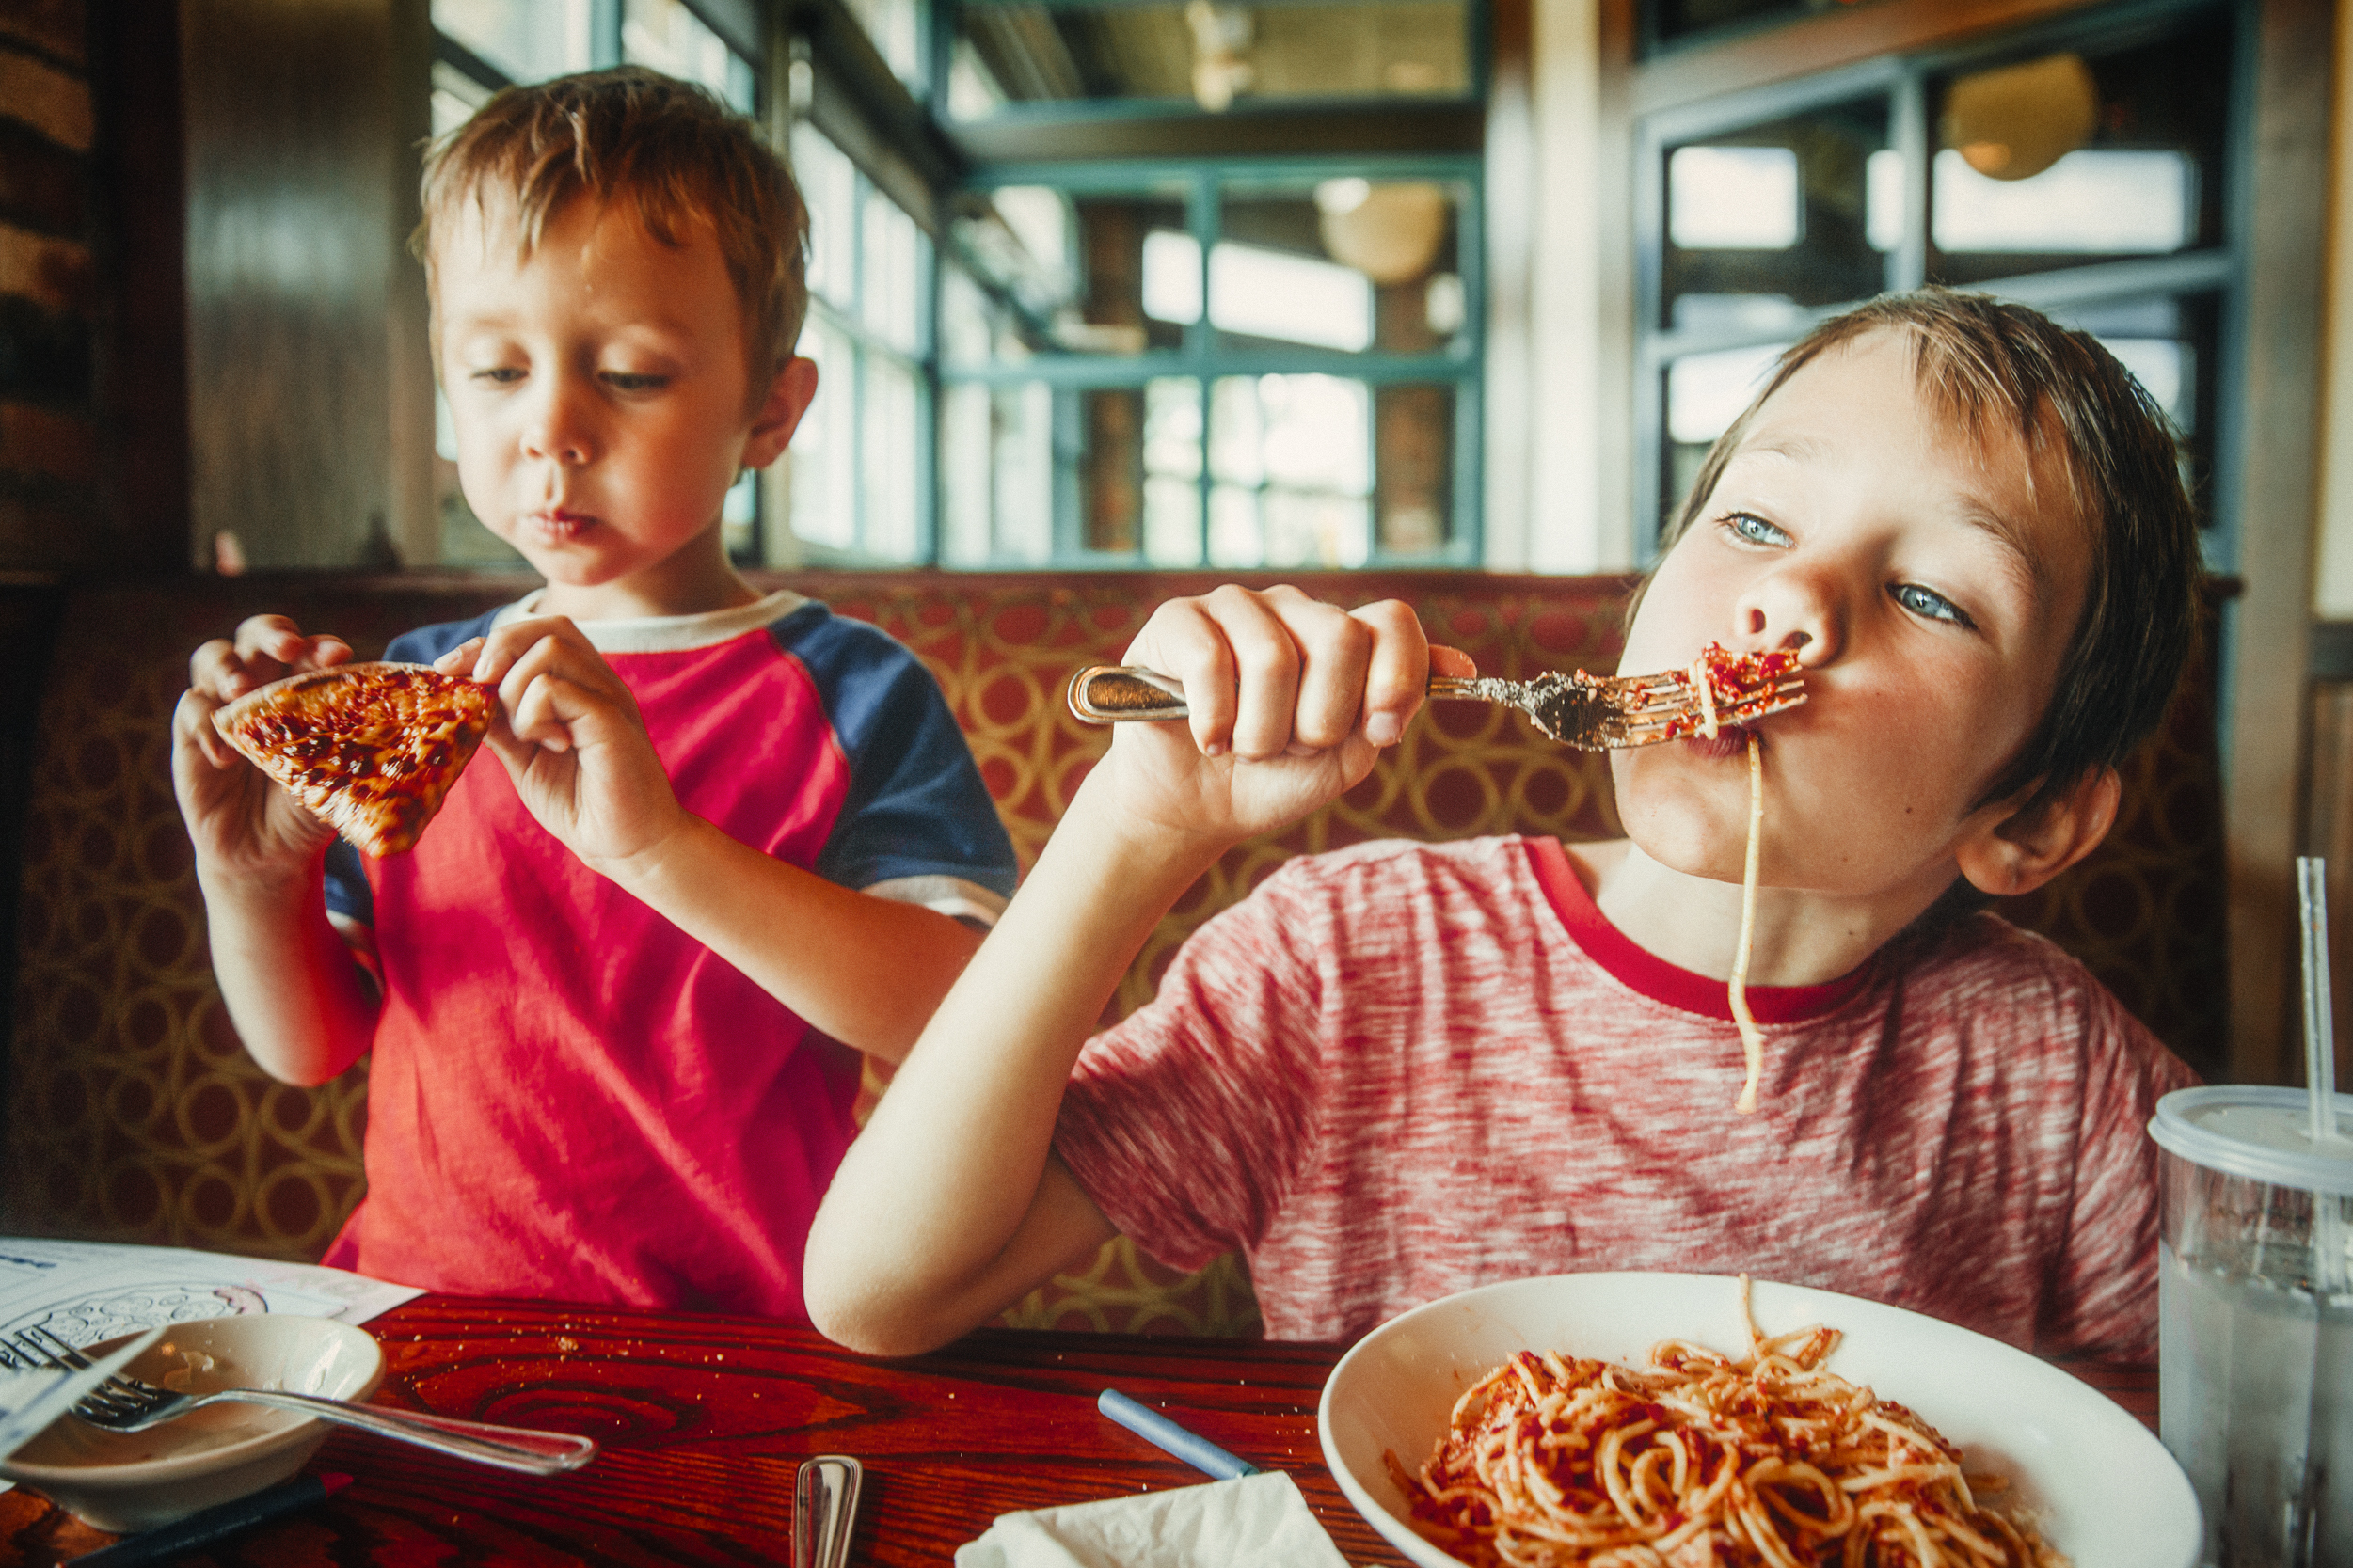 Kids,Eat,Pizza,And,Pasta,At,Cafe.,Children,Eating,Unhealthy